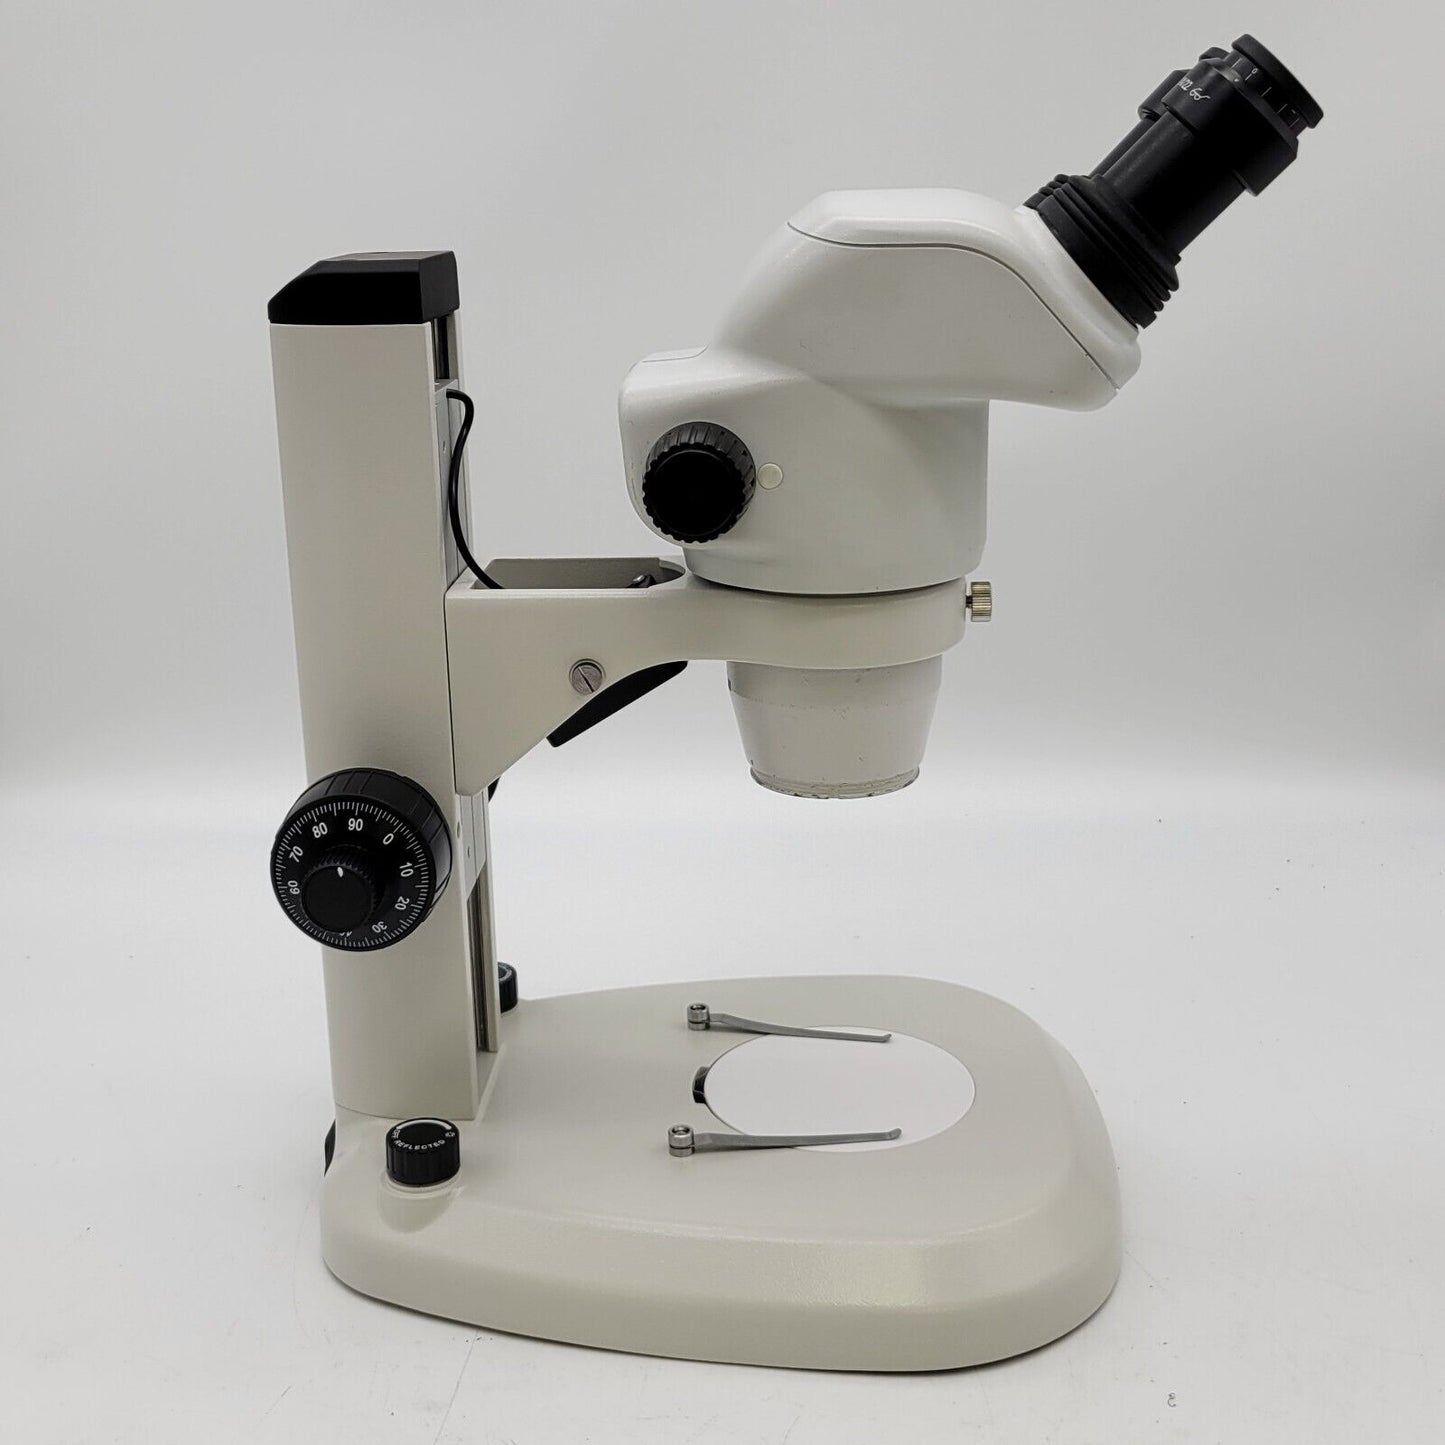 Nikon Stereo Microscope SMZ745 with Reflected and Transmitted Light Stand - microscopemarketplace